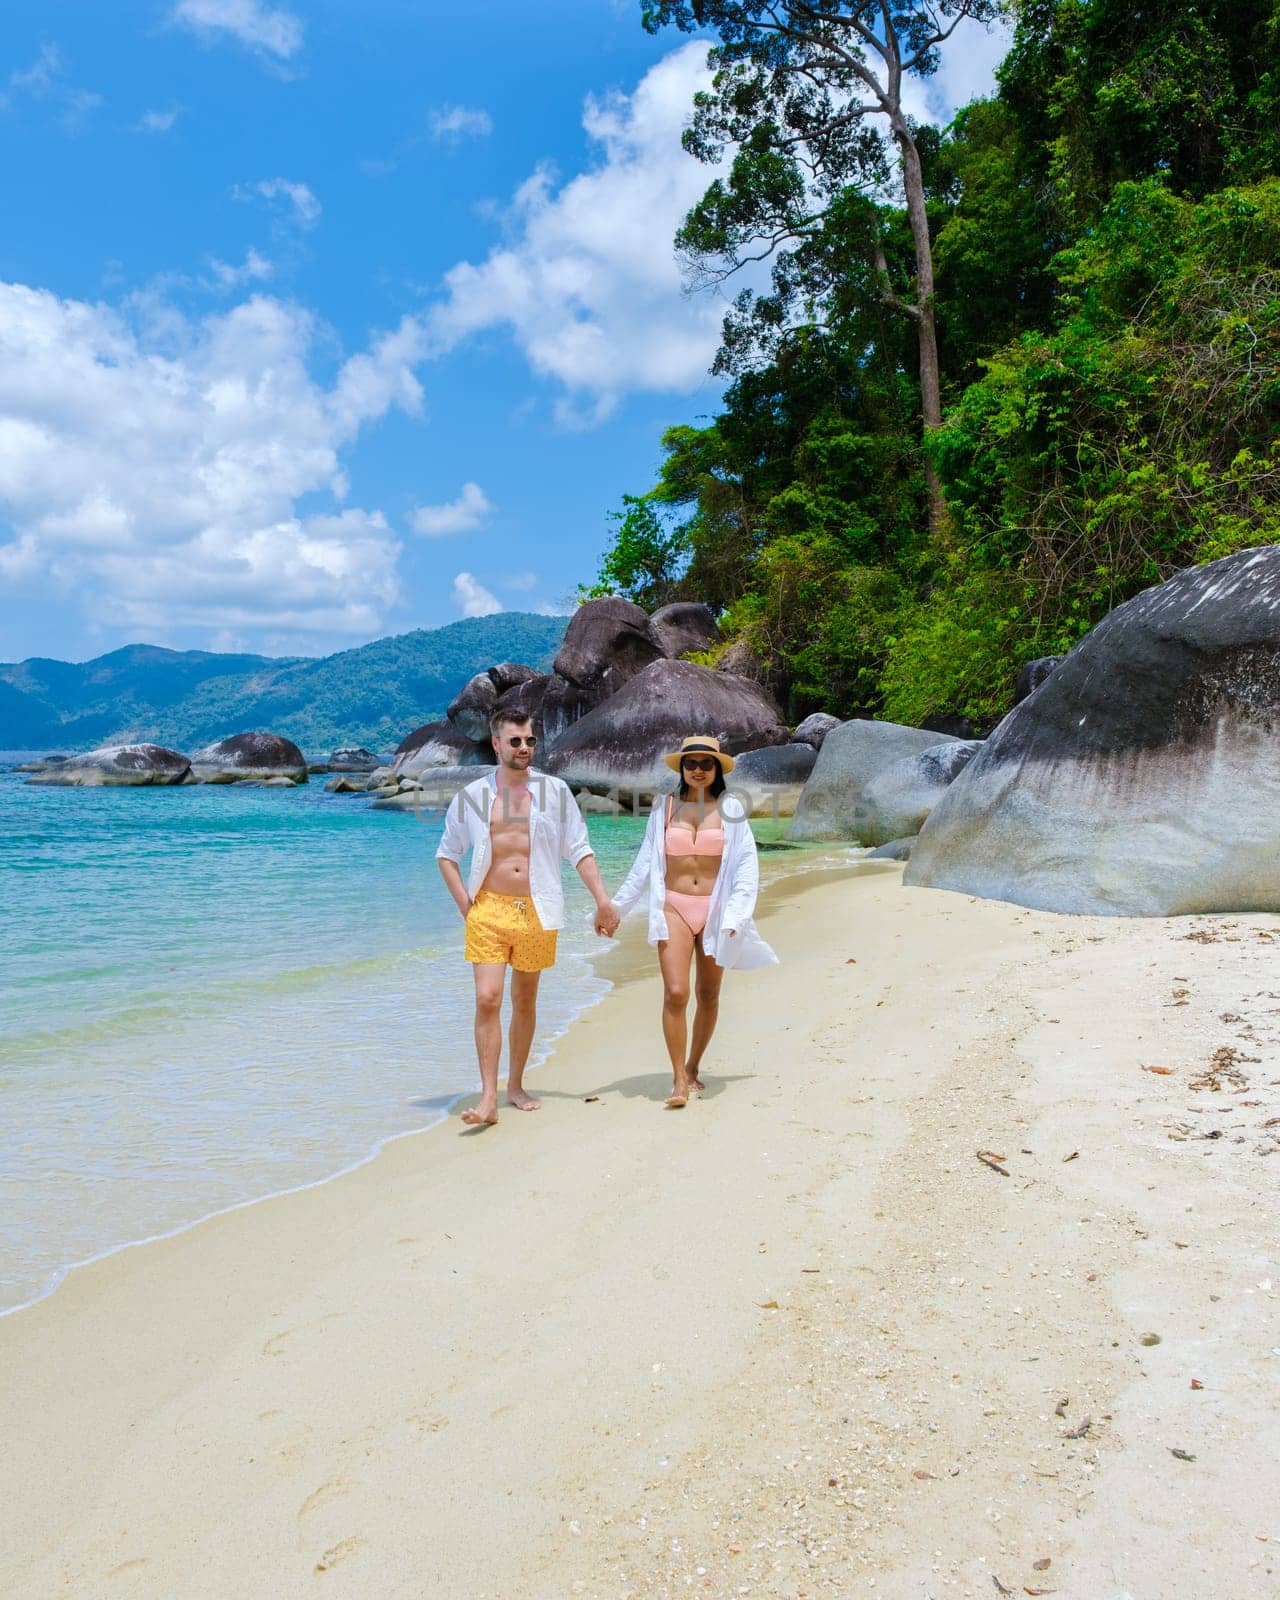 couple of men and women on the beach in swimwear at Koh Adang Island near Koh Lipe Island Southern Thailand with turqouse colored ocean and white sandy beach Tarutao National Park